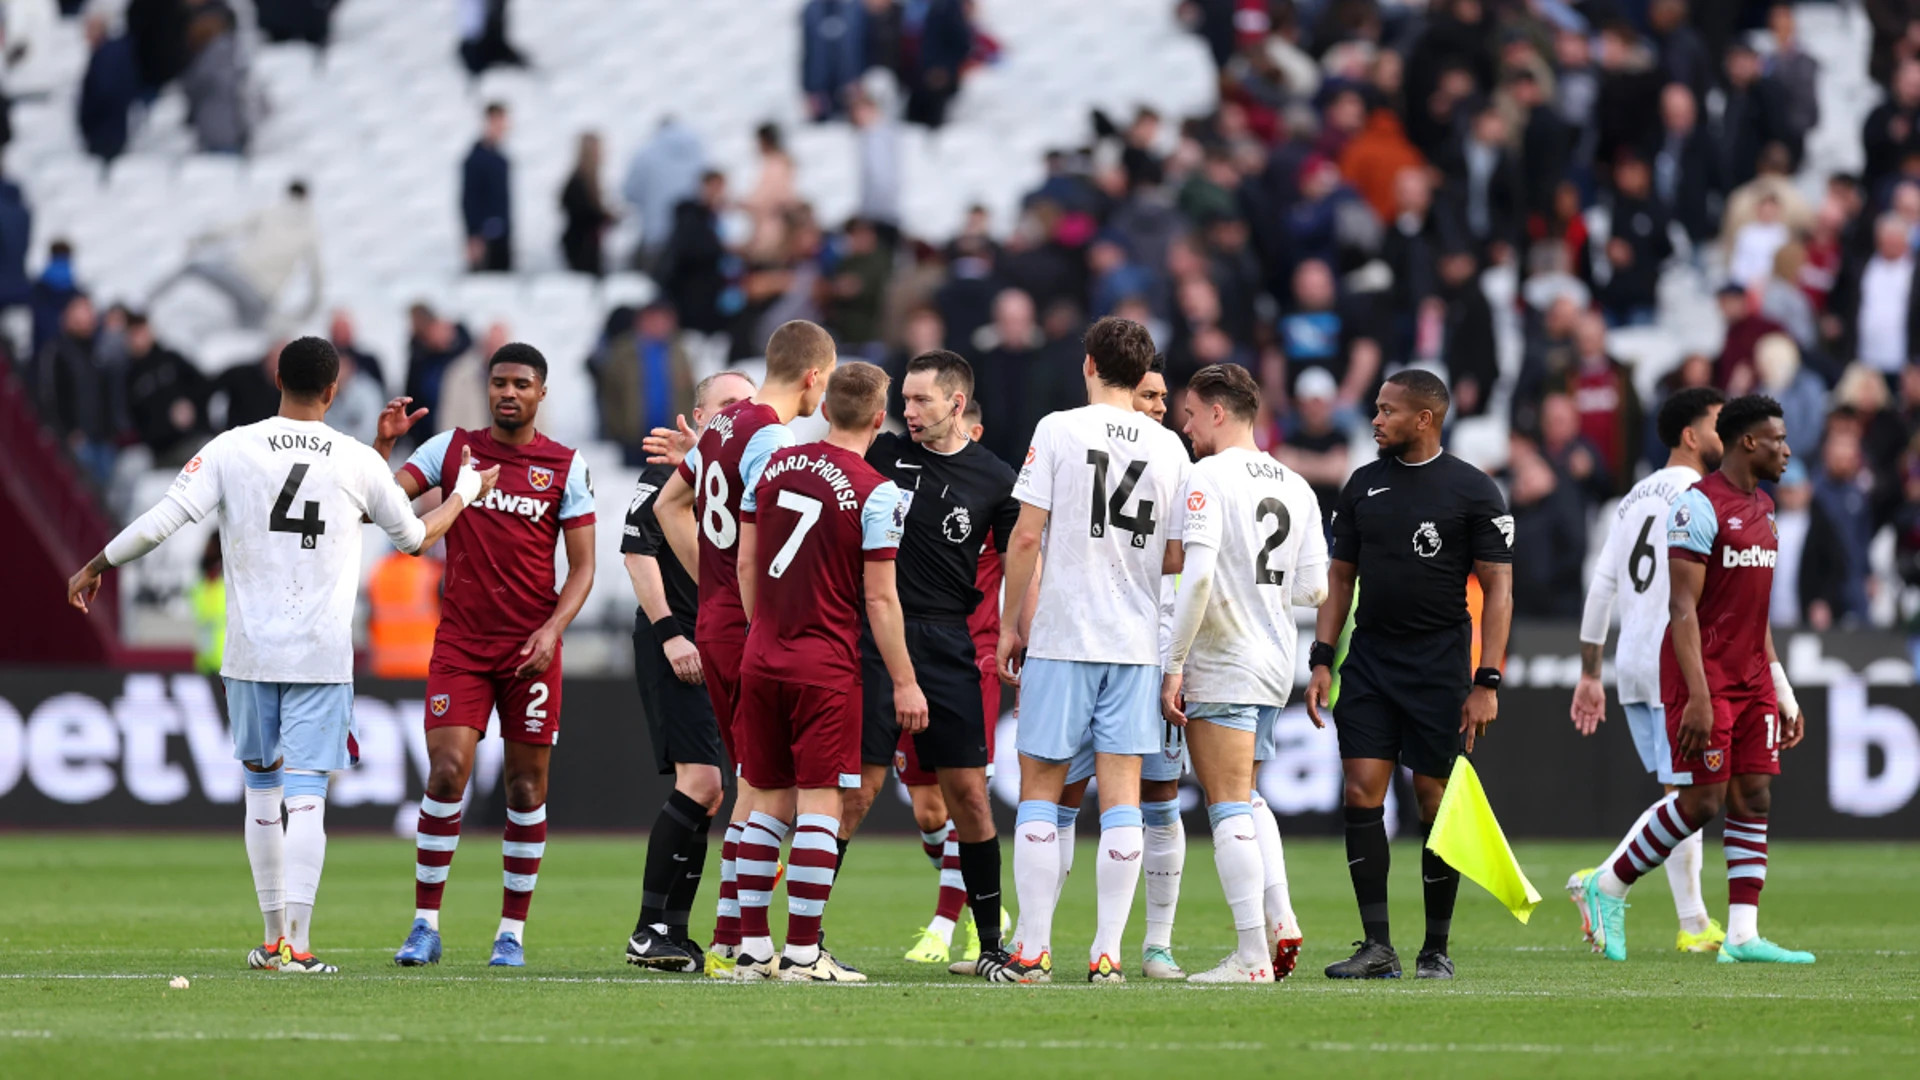 West Ham's late goal ruled out in draw with Aston Villa